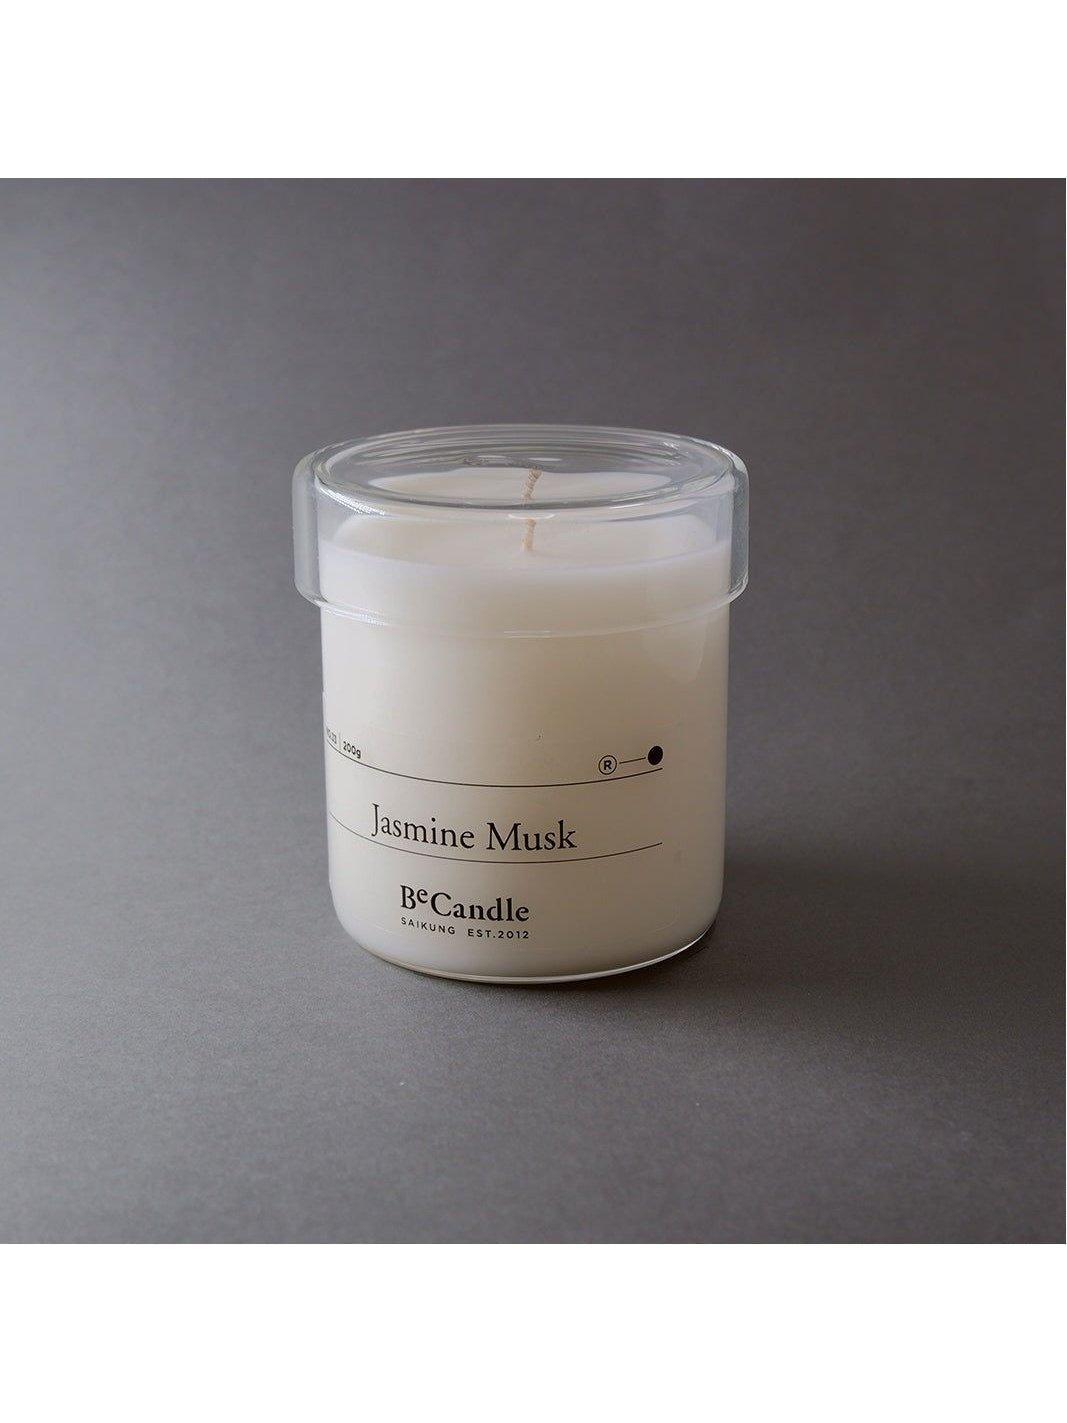 BeCandle Jasmine Musk Scented Candle 200g - No.33